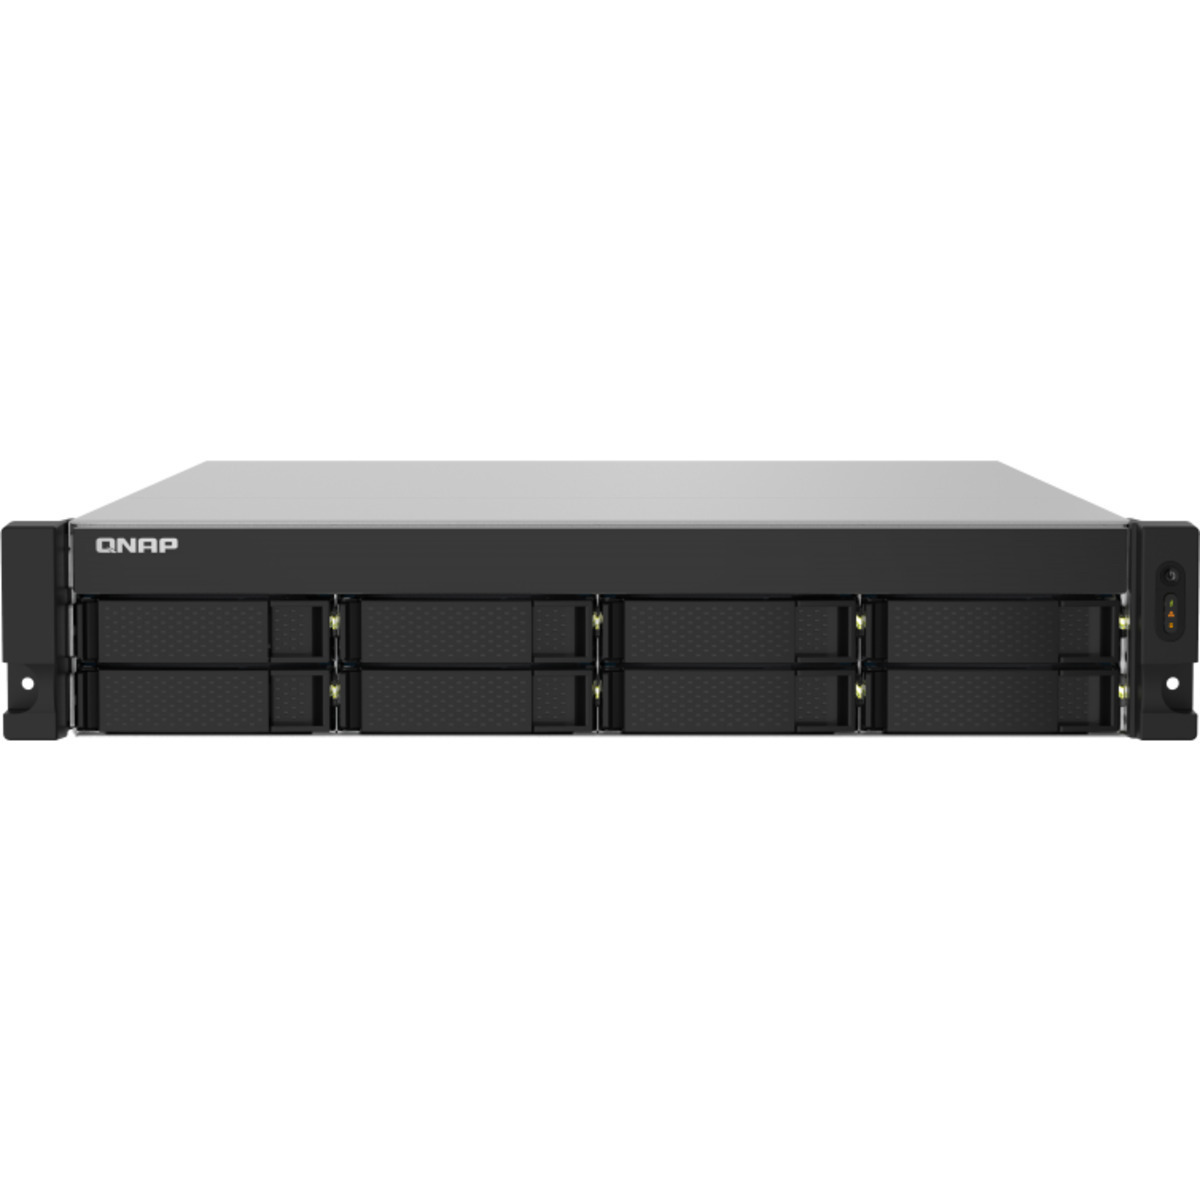 QNAP TS-832PXU DISKLESS 8-Bay RackMount Personal / Basic Home / Small Office NAS - Network Attached Storage Device TS-832PXU